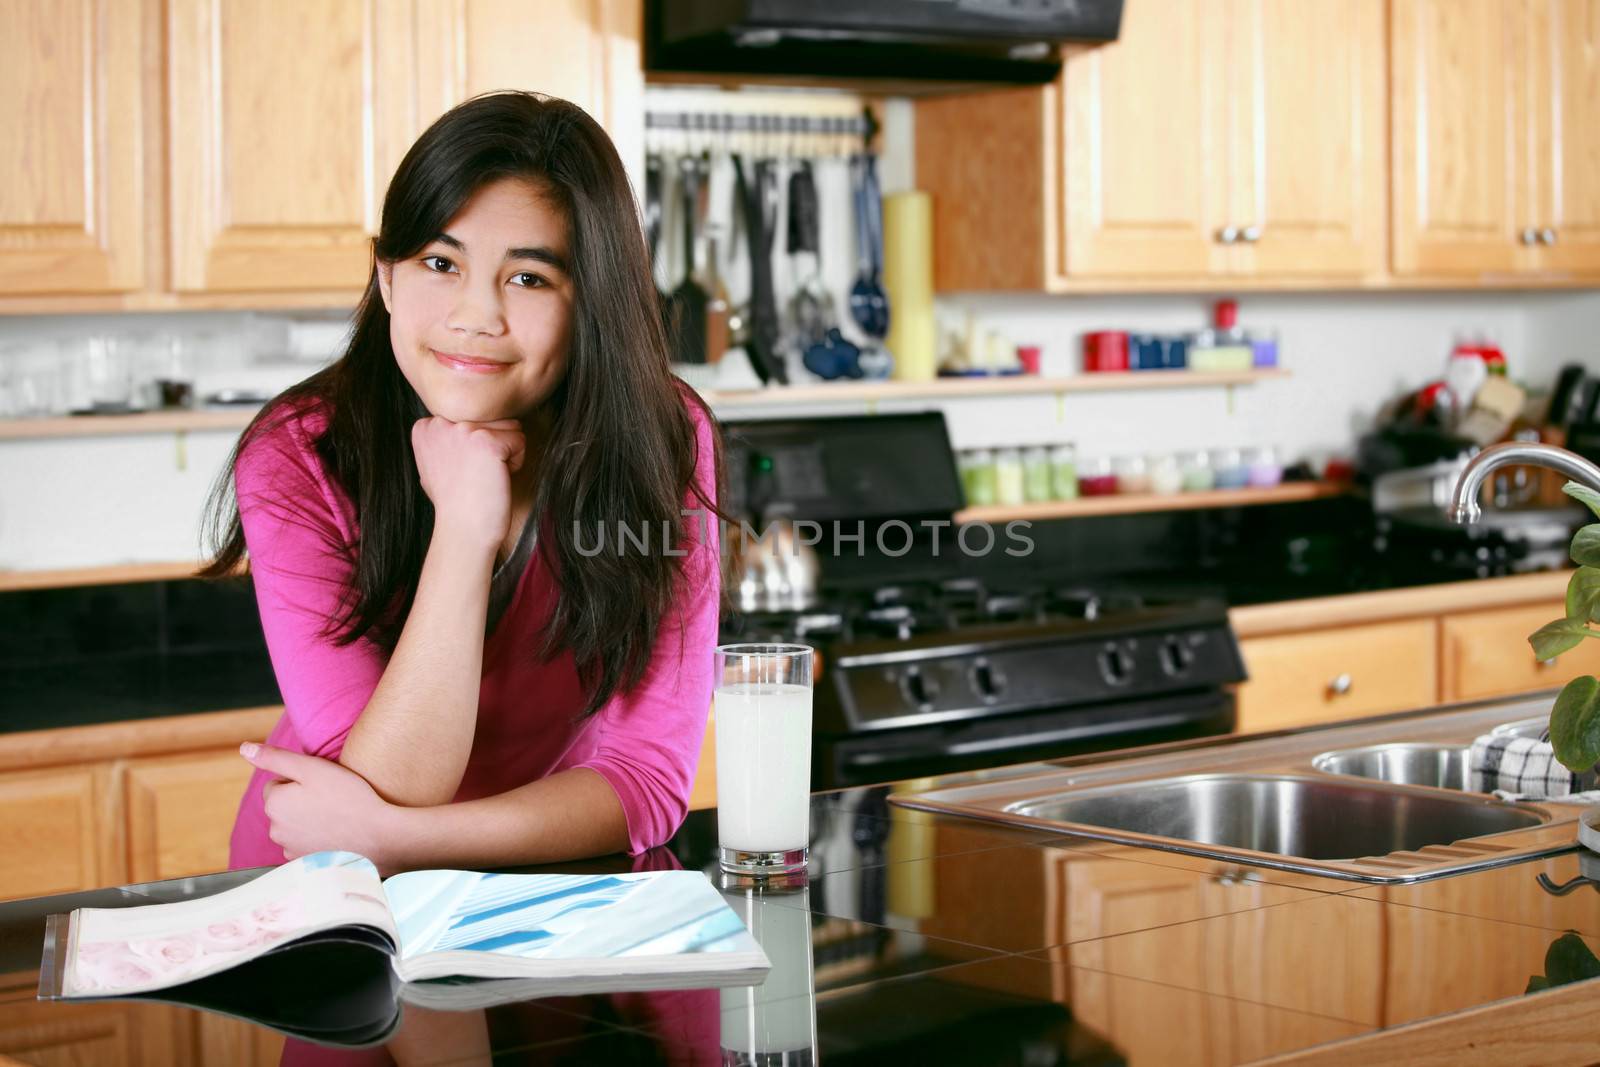 Teen girl relaxing in kitchen with magazine and glass of milk